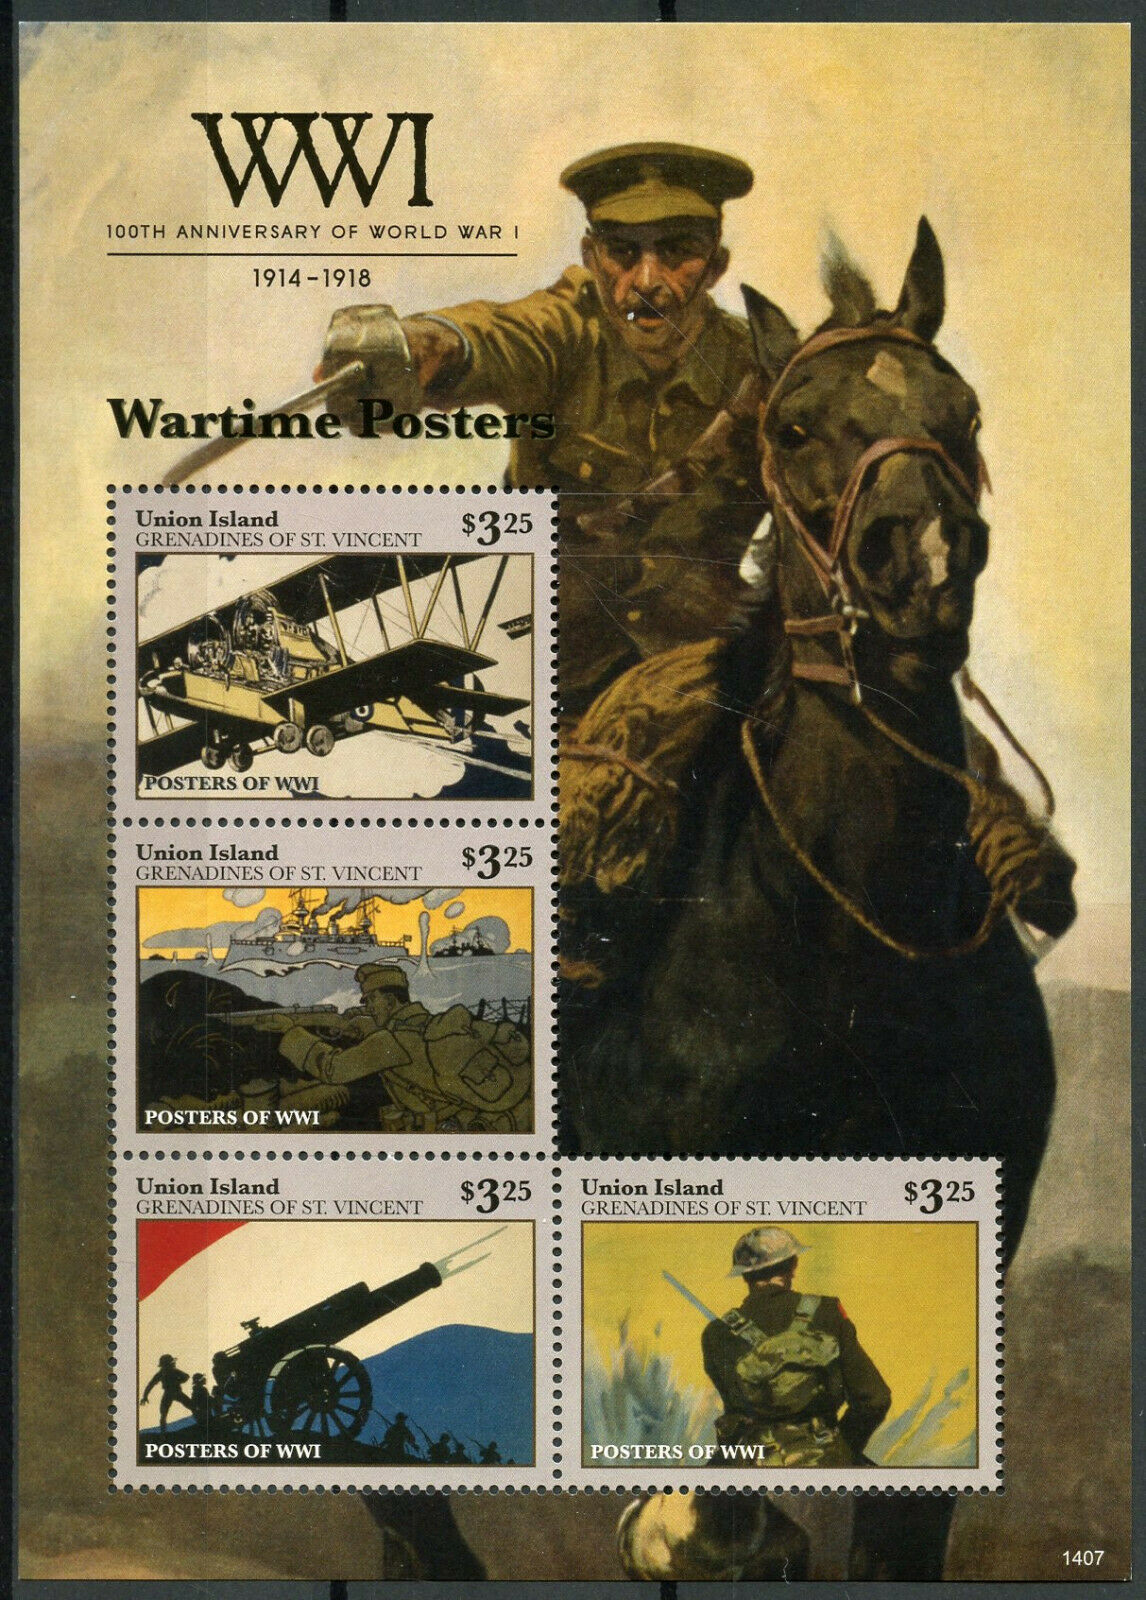 Union Island Gren St Vincent Stamps 2014 MNH WWI WW1 Wartime Posters 4v M/S